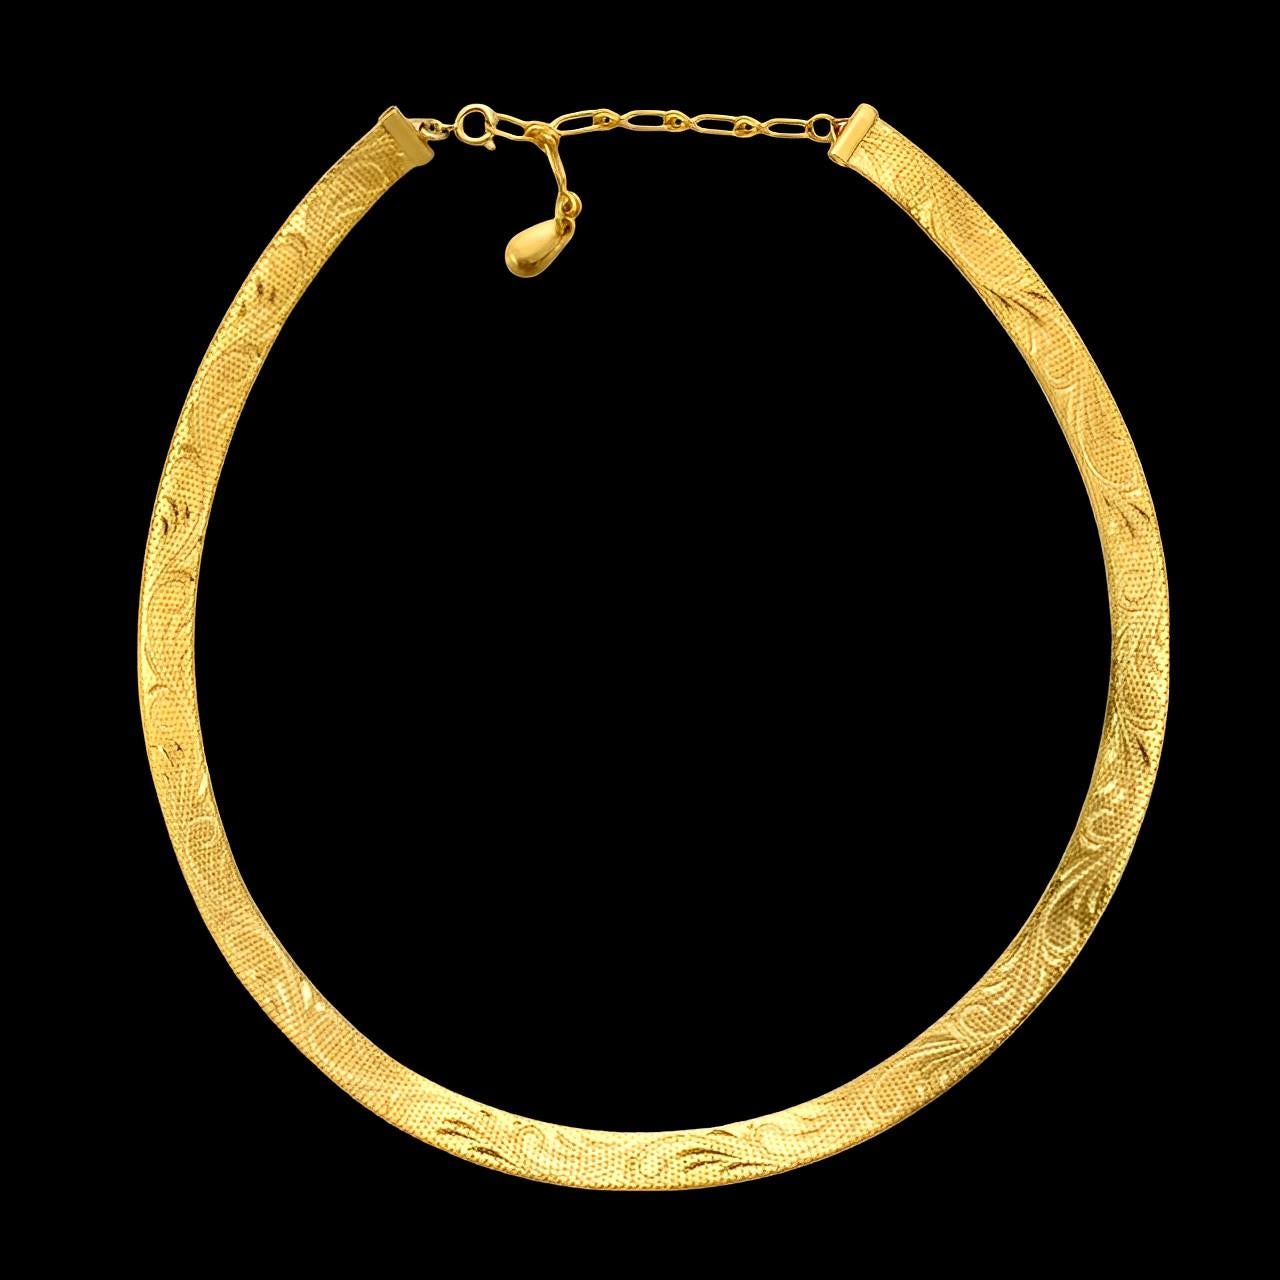 Gold Plated Swirl Design Egyptian Revival Mesh Collar Necklace circa 1980s For Sale 4